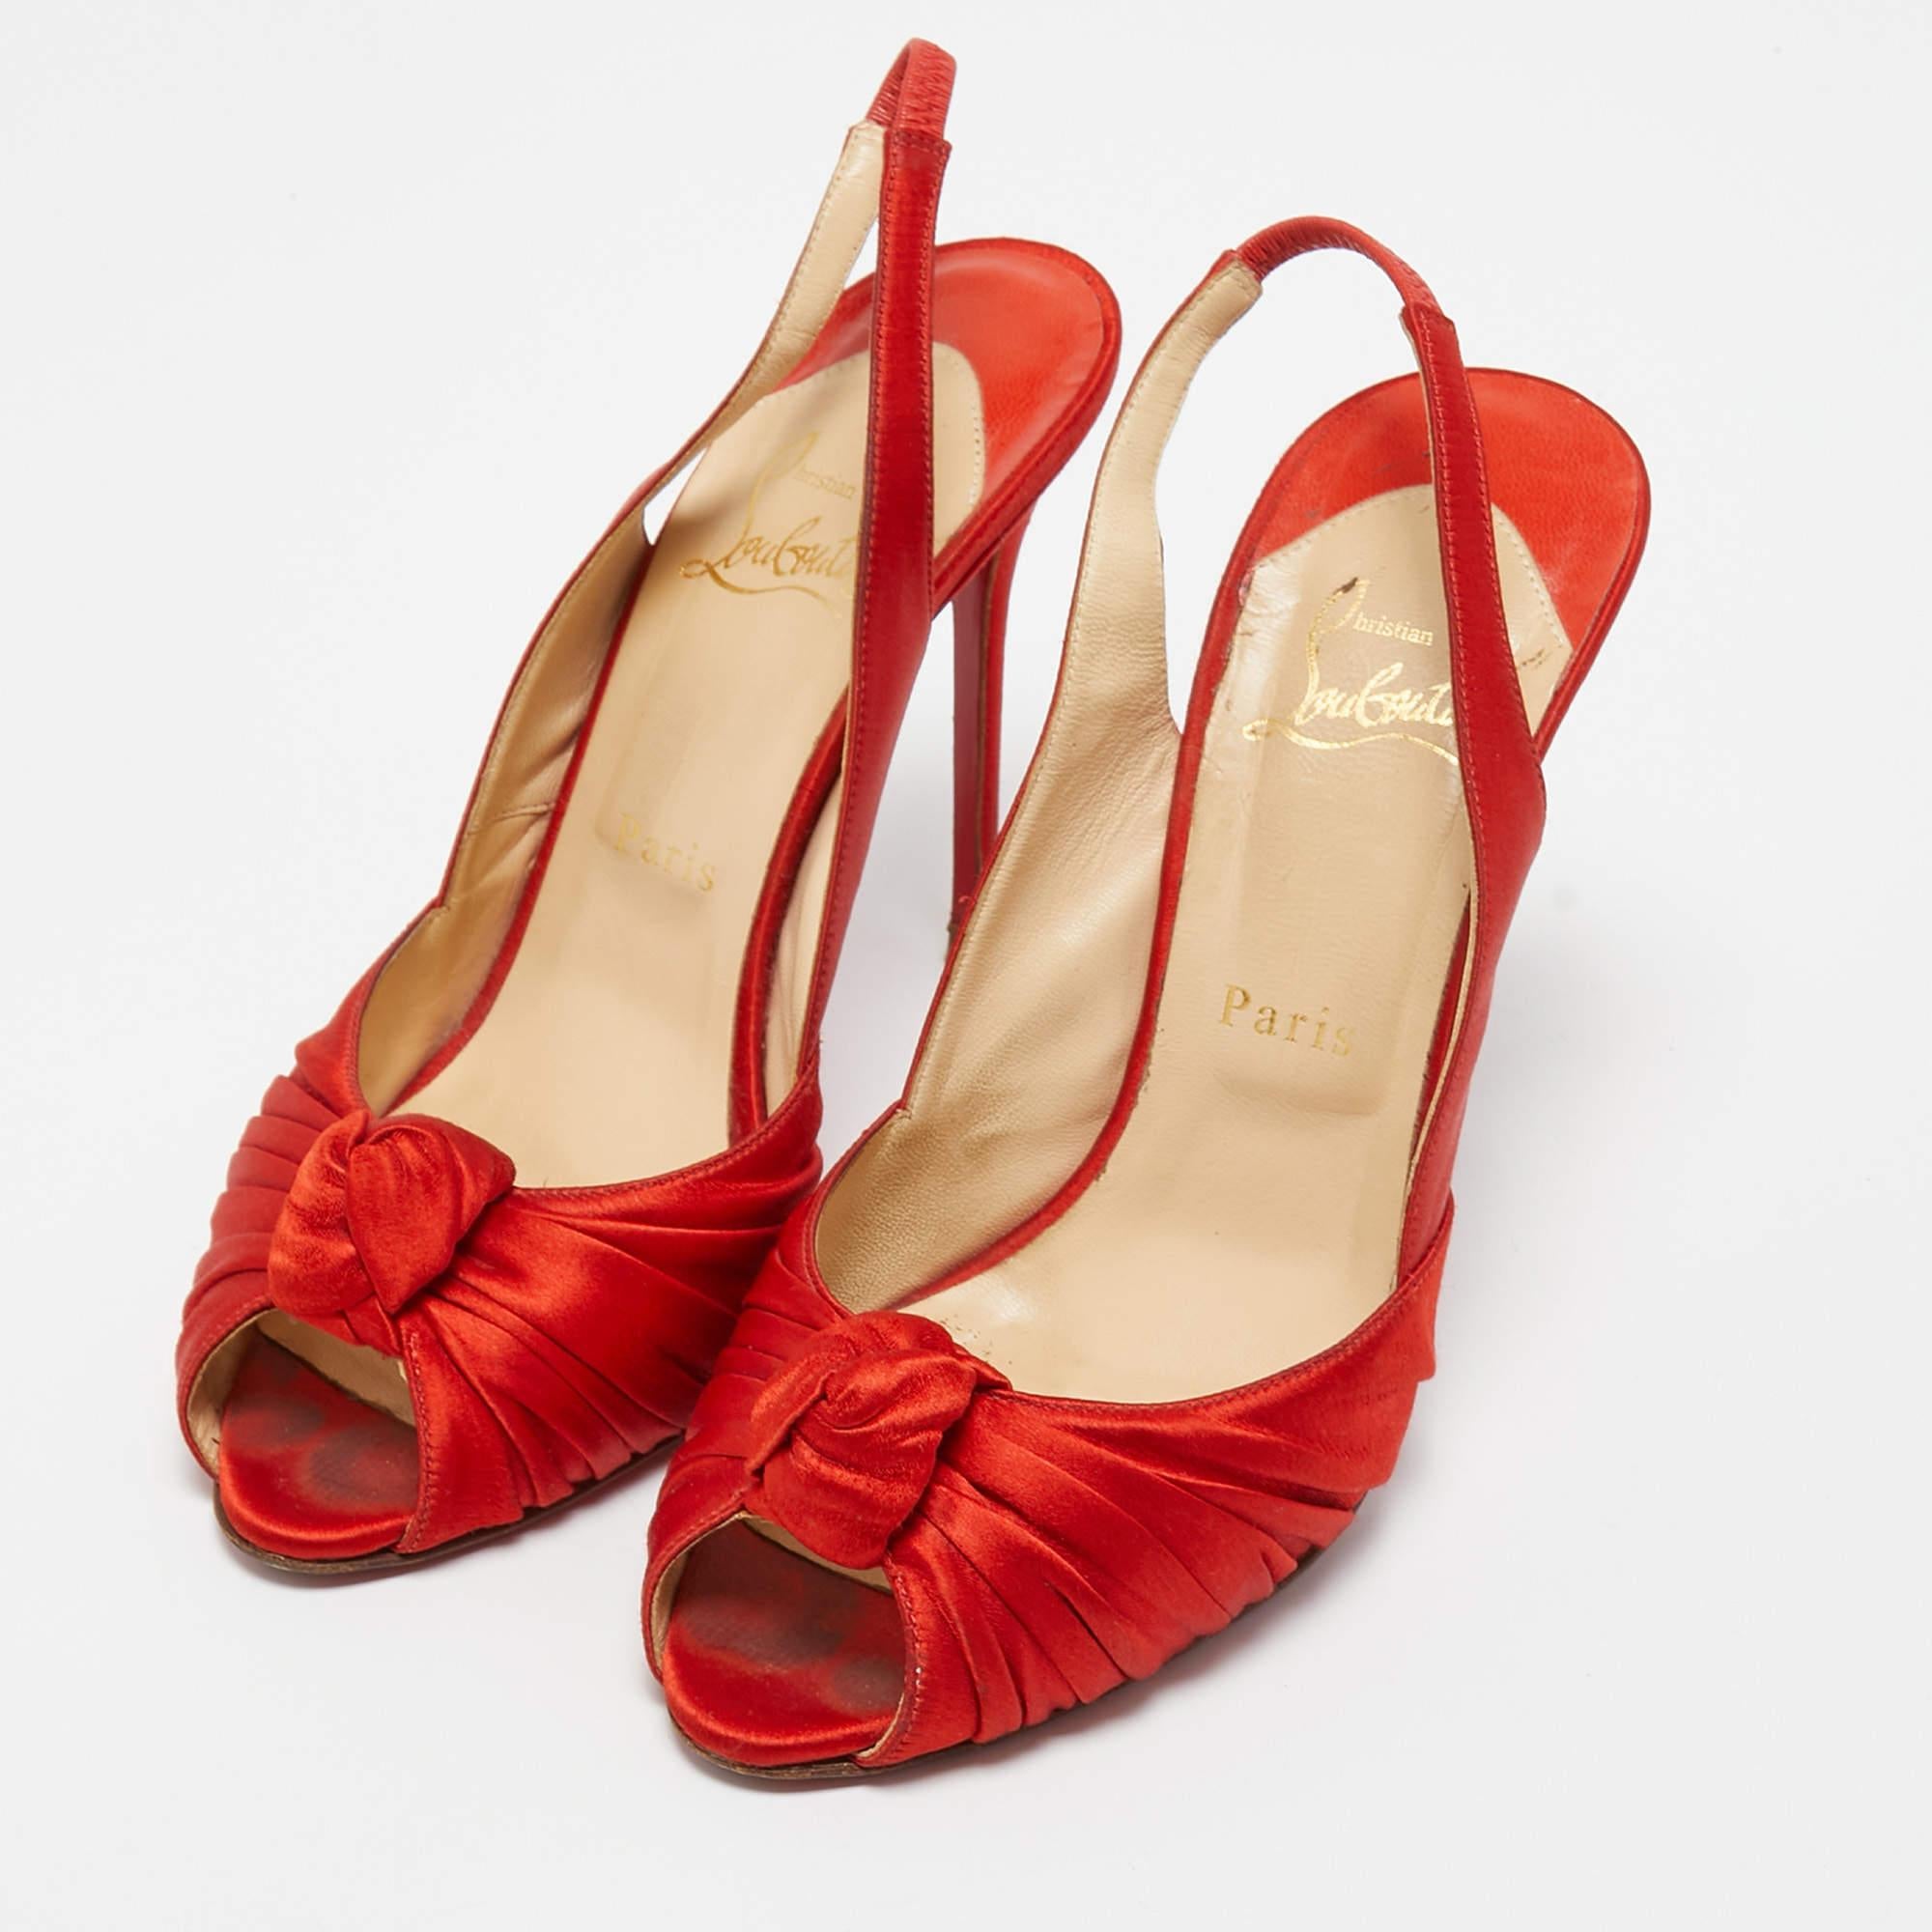 These red pumps from Christian are meant to be a loved choice. Wonderfully crafted and balanced on sleek heels, the slingback pumps will lift your feet in a stunning silhouette.

